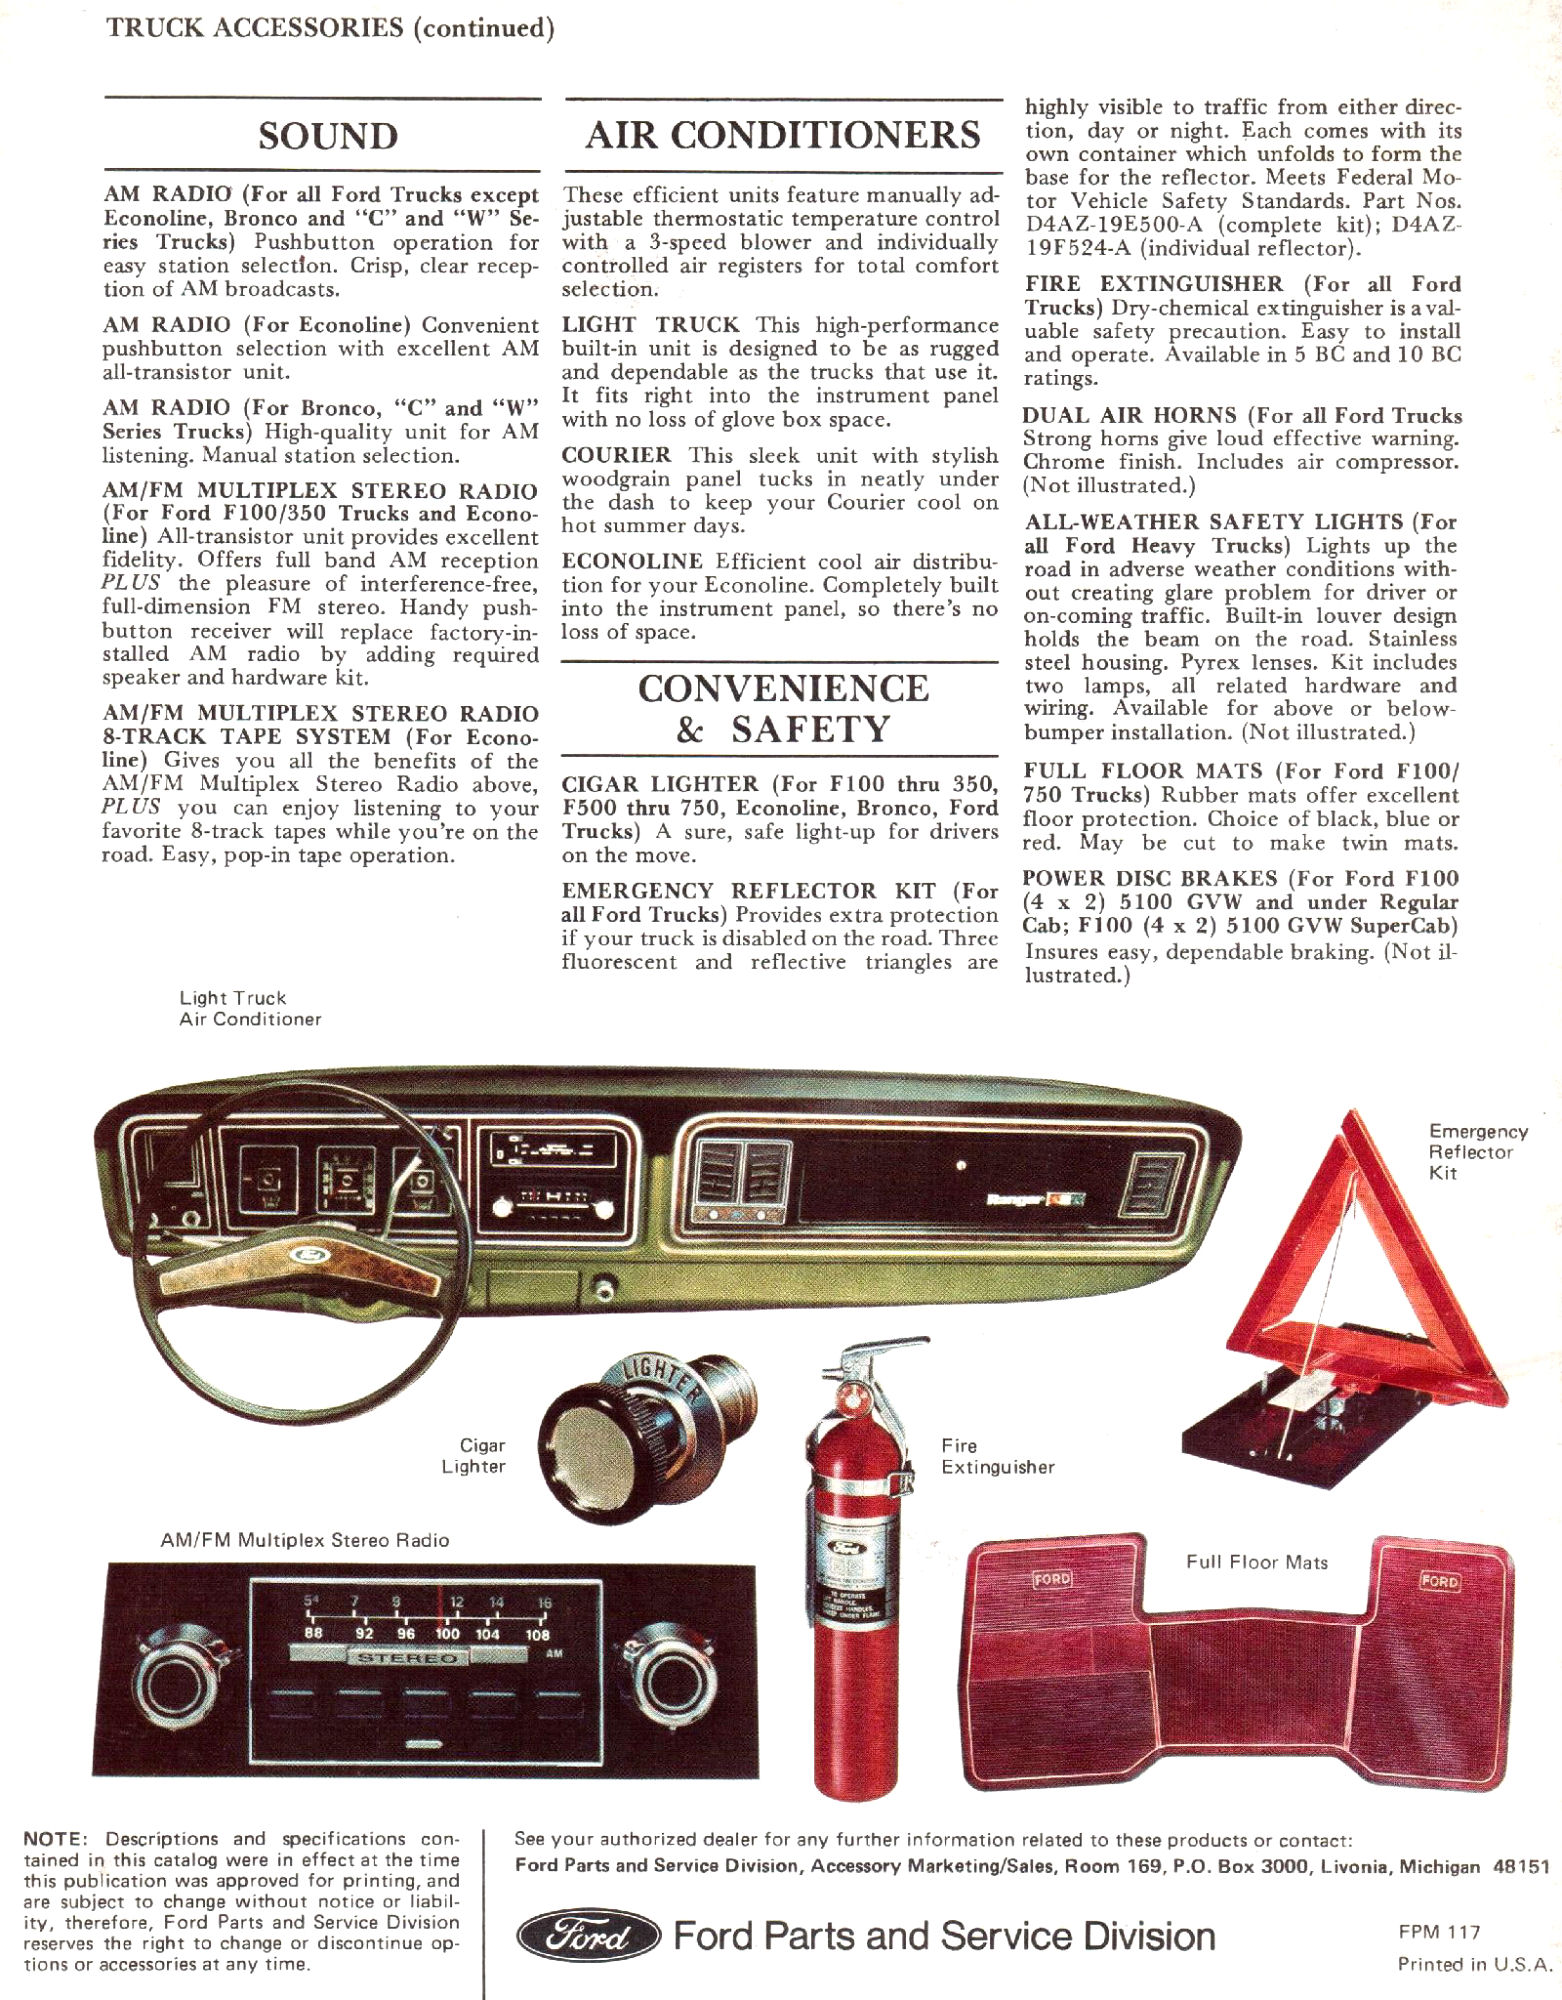 1976 Ford Car & Truck Accessories-12